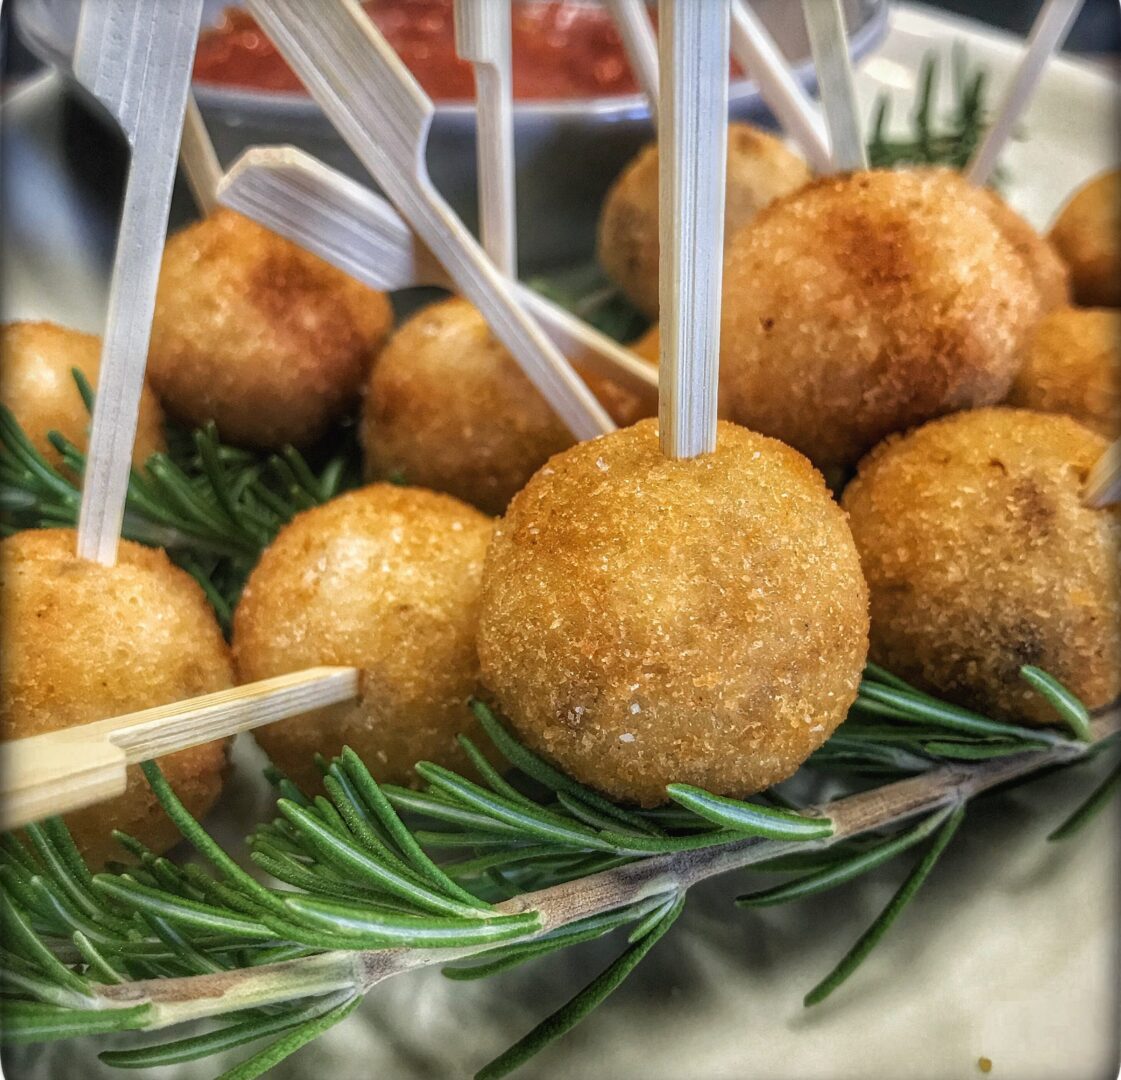 A plate of meatballs on toothpicks with a rosemary sprig.